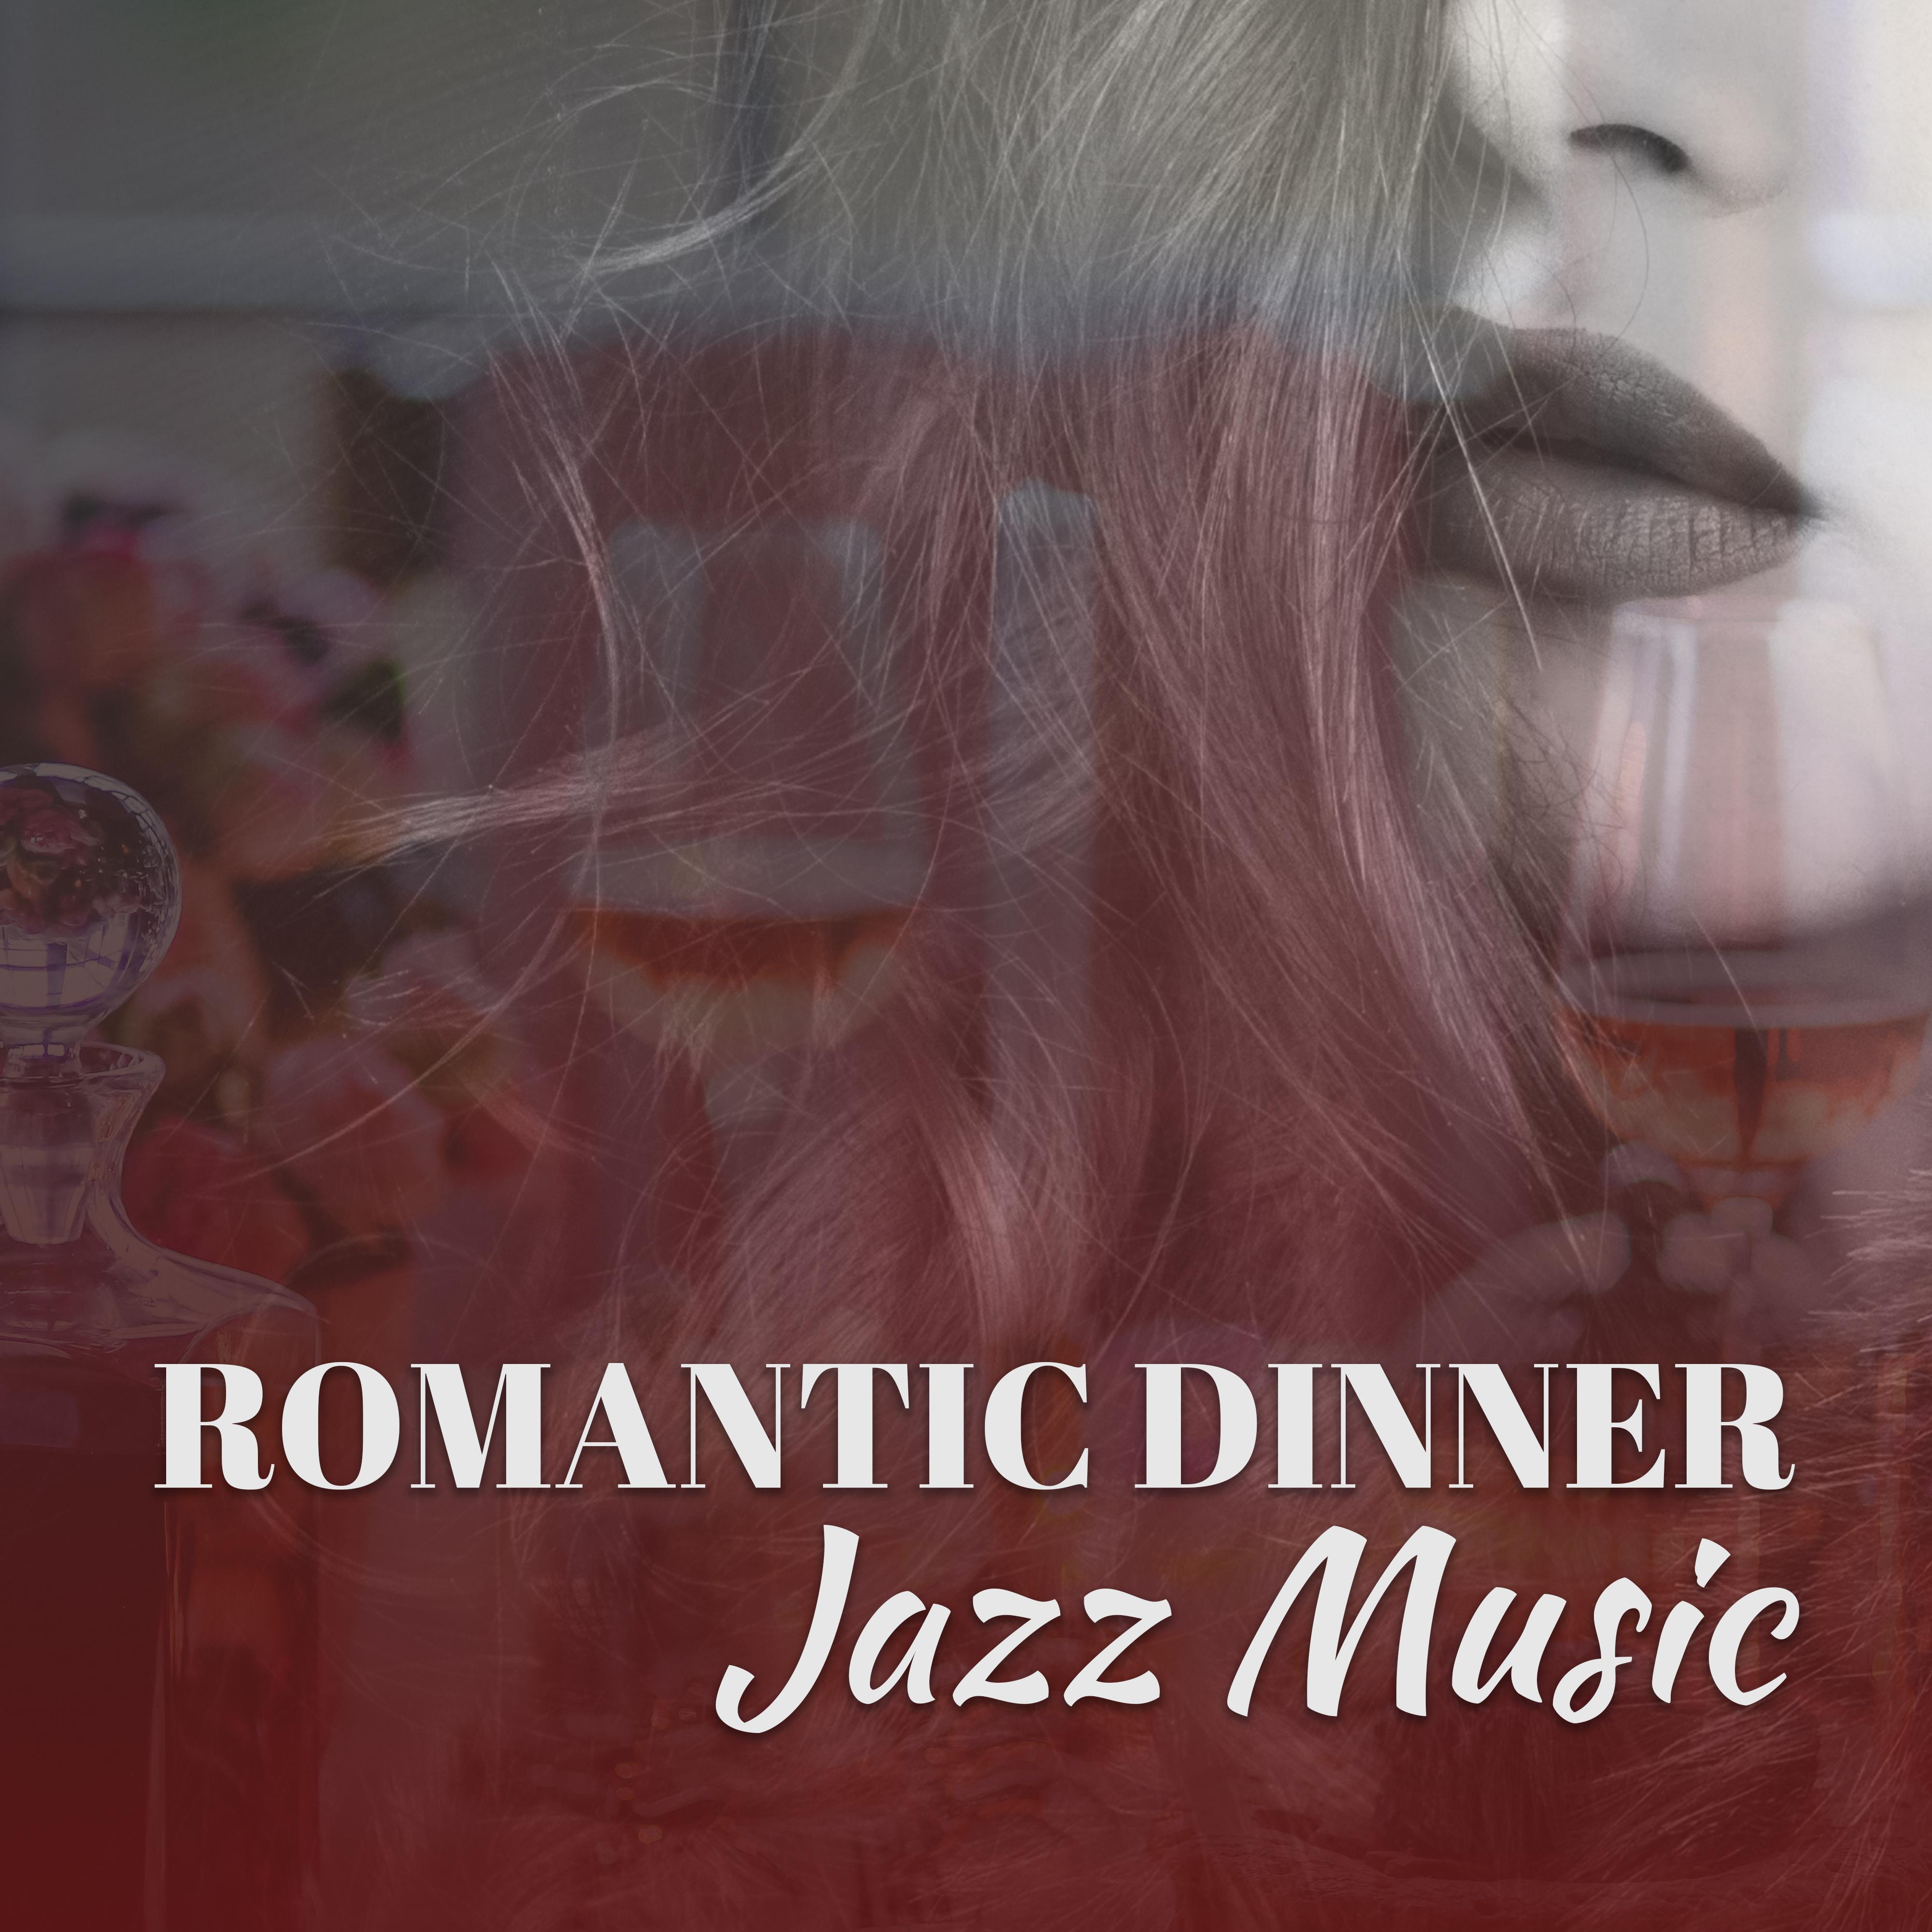 Romantic Dinner Jazz Music  Calming Jazz Sounds, Dinner with Candle Light, Smooth Sounds to Relax, Easy Listening